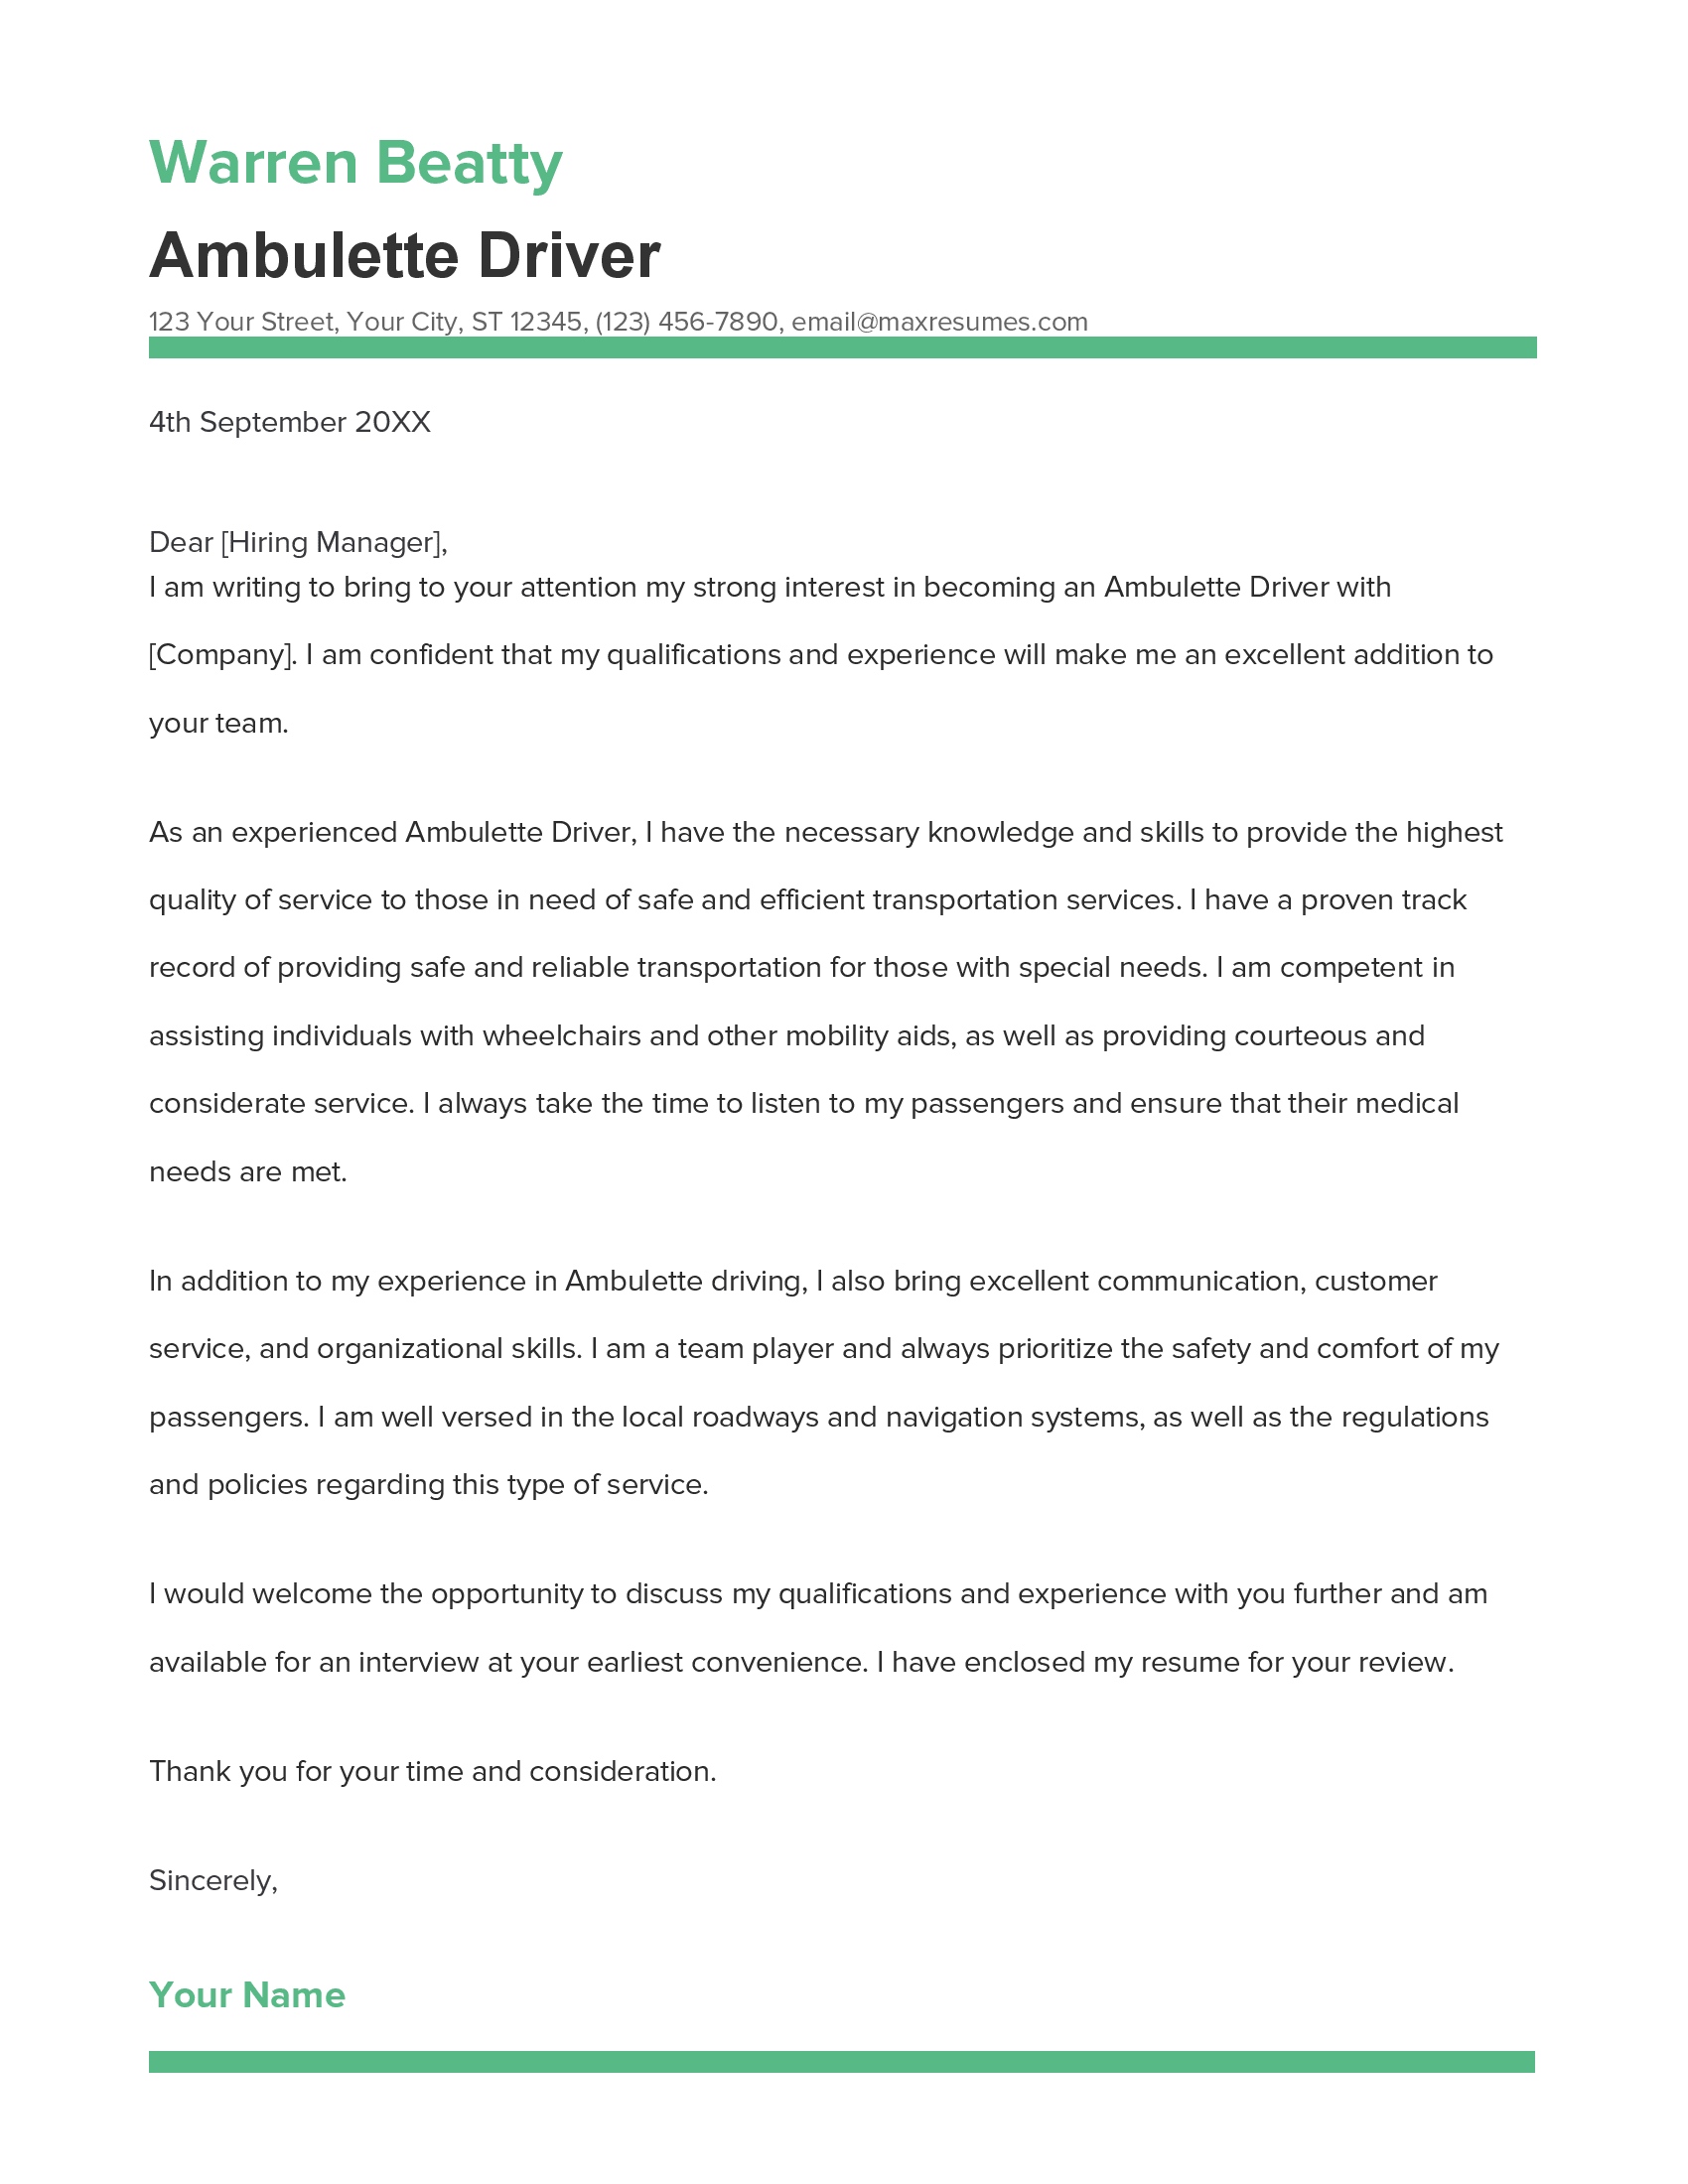 Ambulette Driver Cover Letter Example